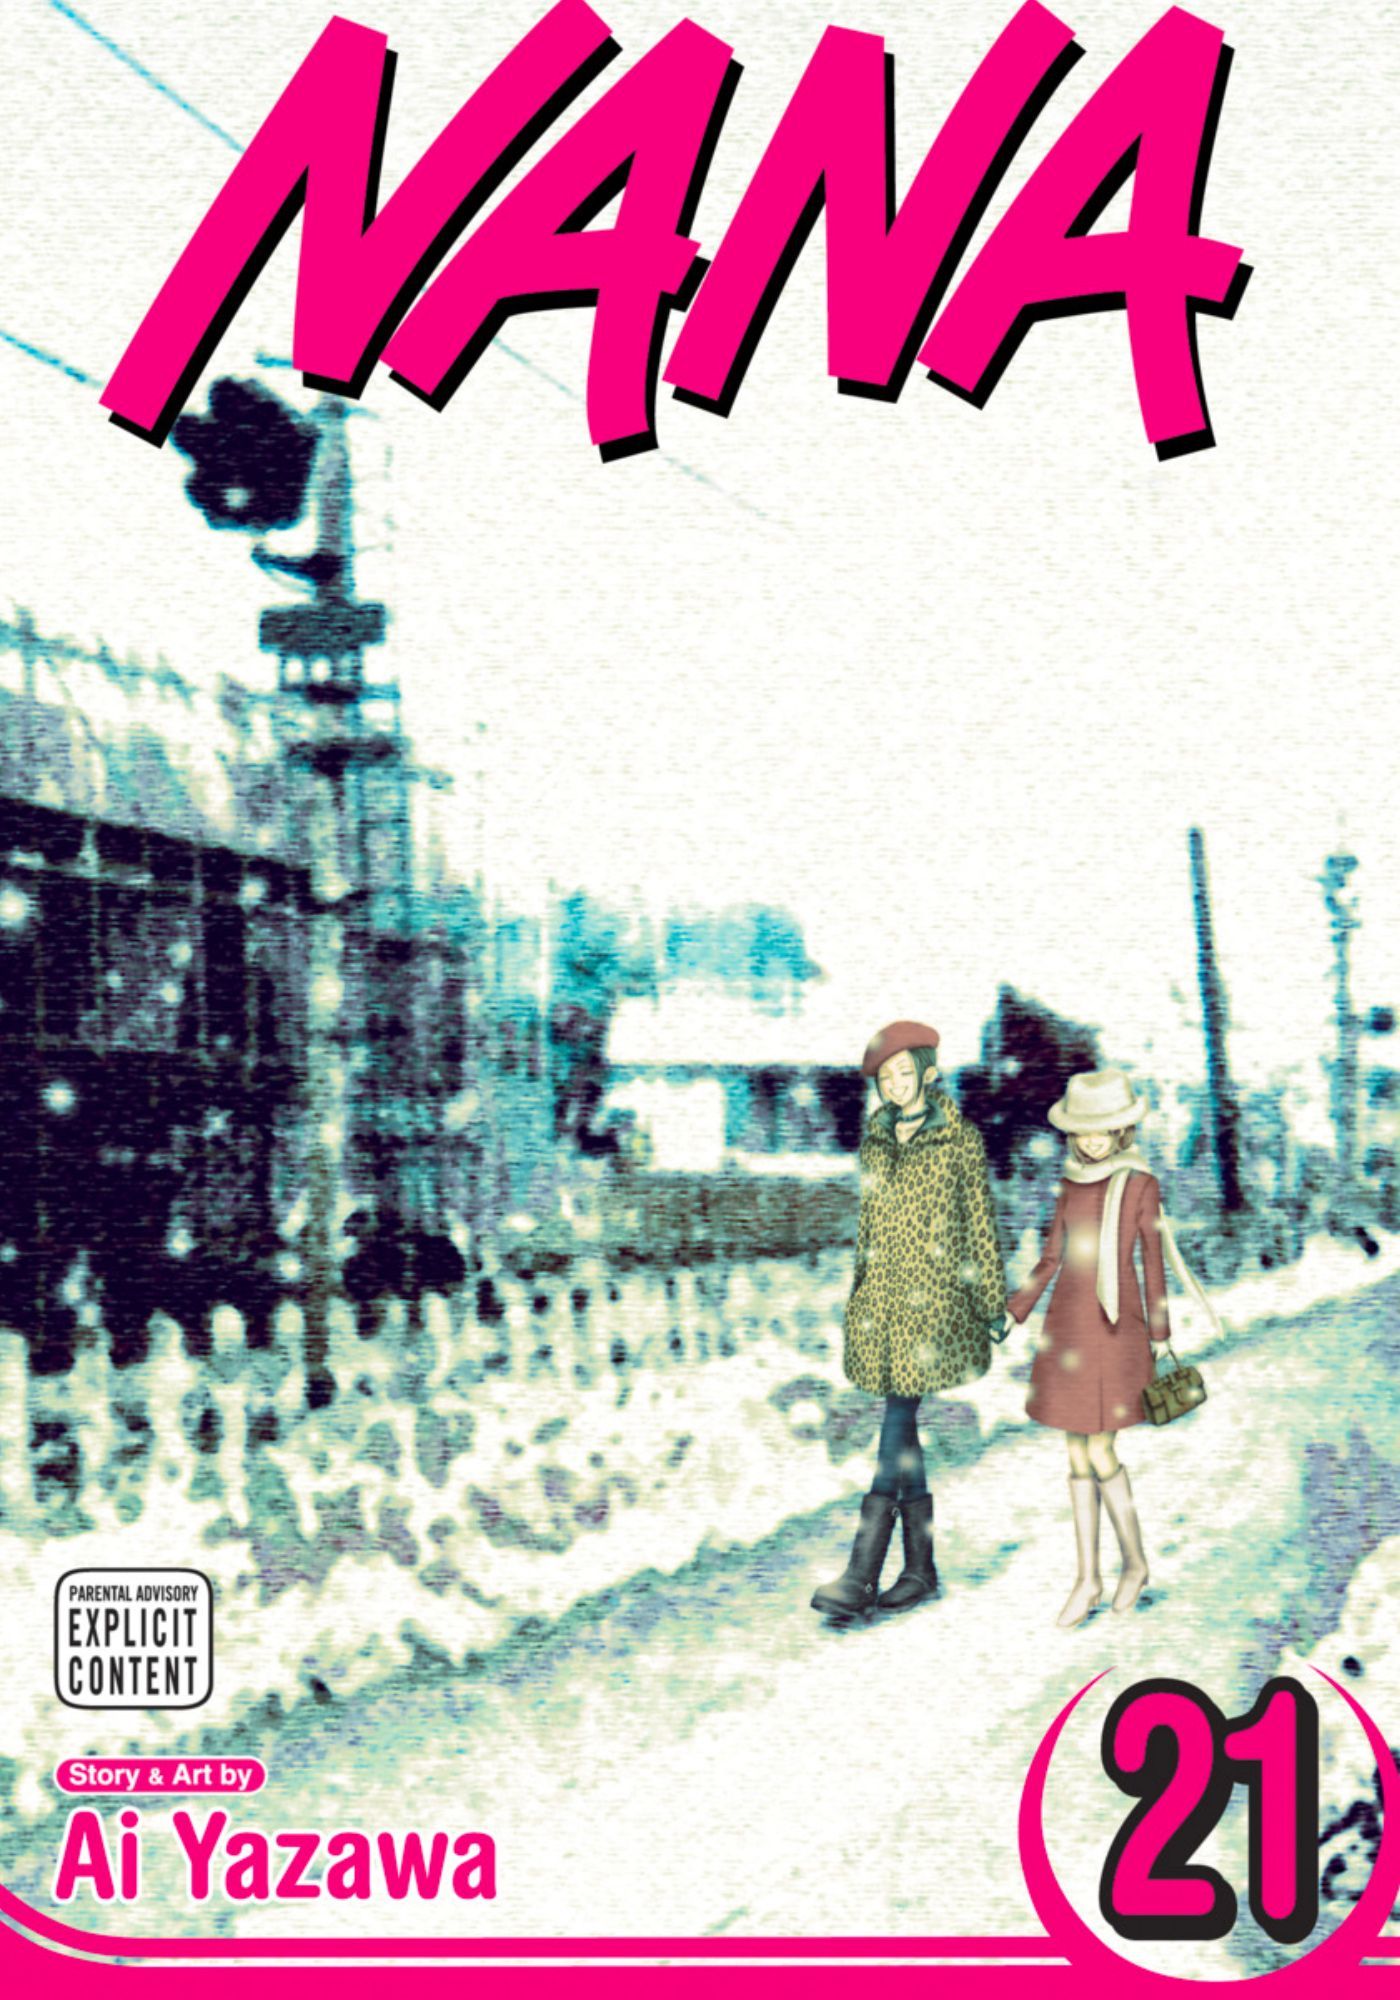 Nana Volume 21 cover art, featuring the 2 girls standing outside, walking home from the train station while holding hands.